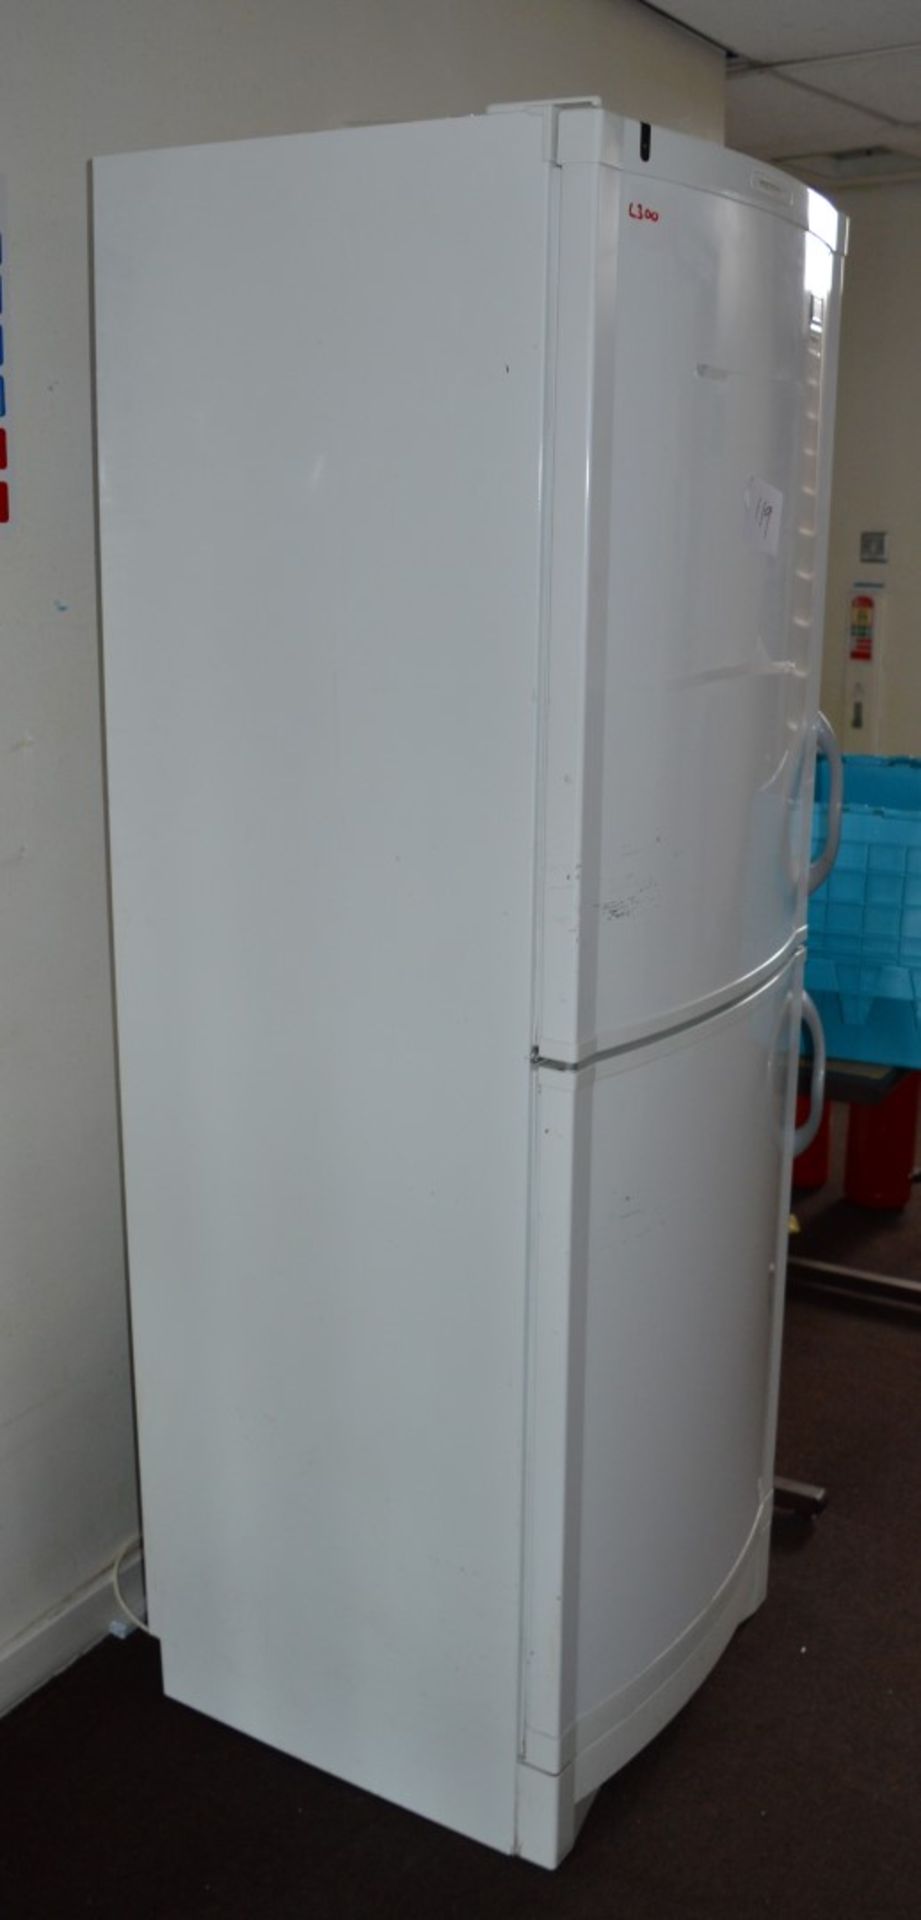 1 x Vestfrost SZ310M Fridge Freezer - Domestic Style For Commercial Use - Fan Assisted Cooling - Ref - Image 2 of 4